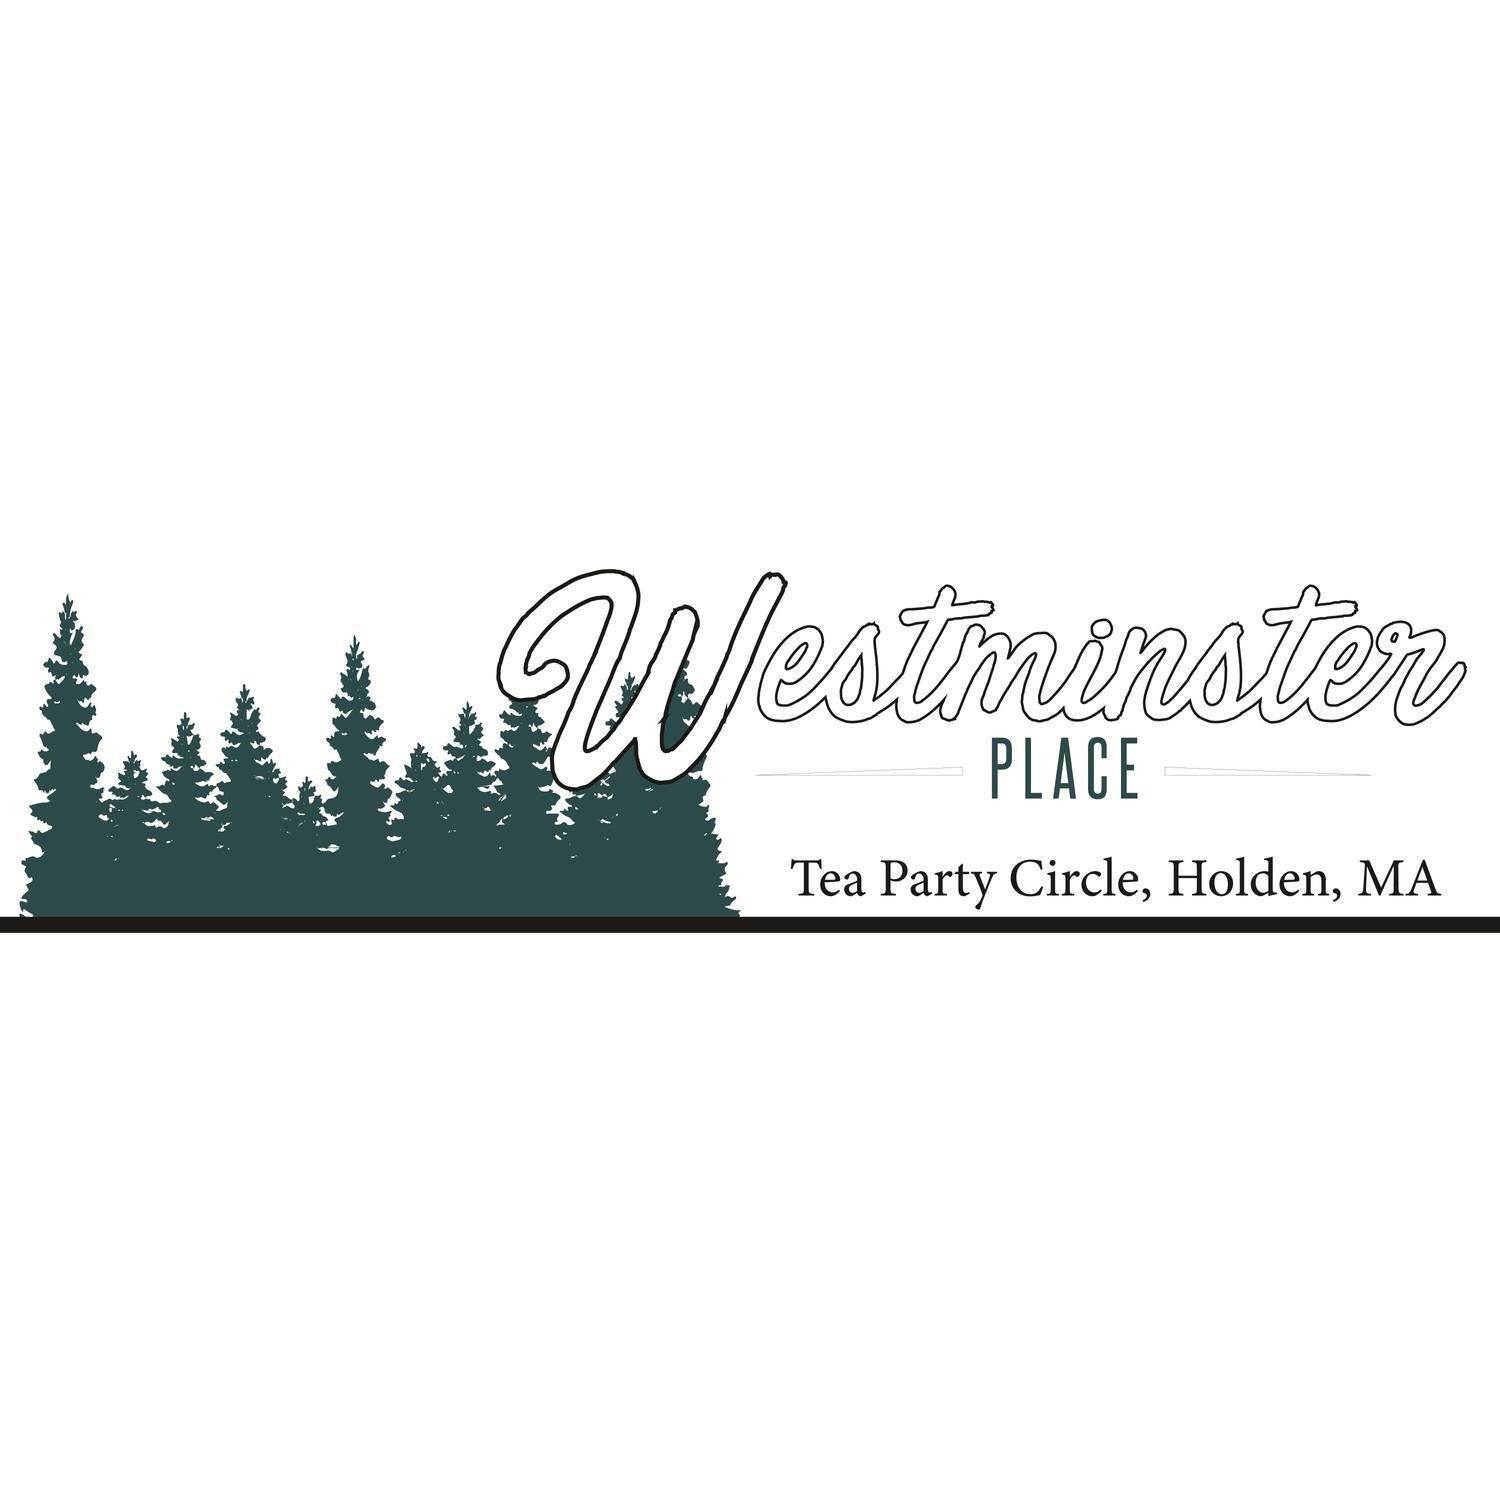 10. Westminster Place building at 27 Tea Party Cir, Holden, MA 01520